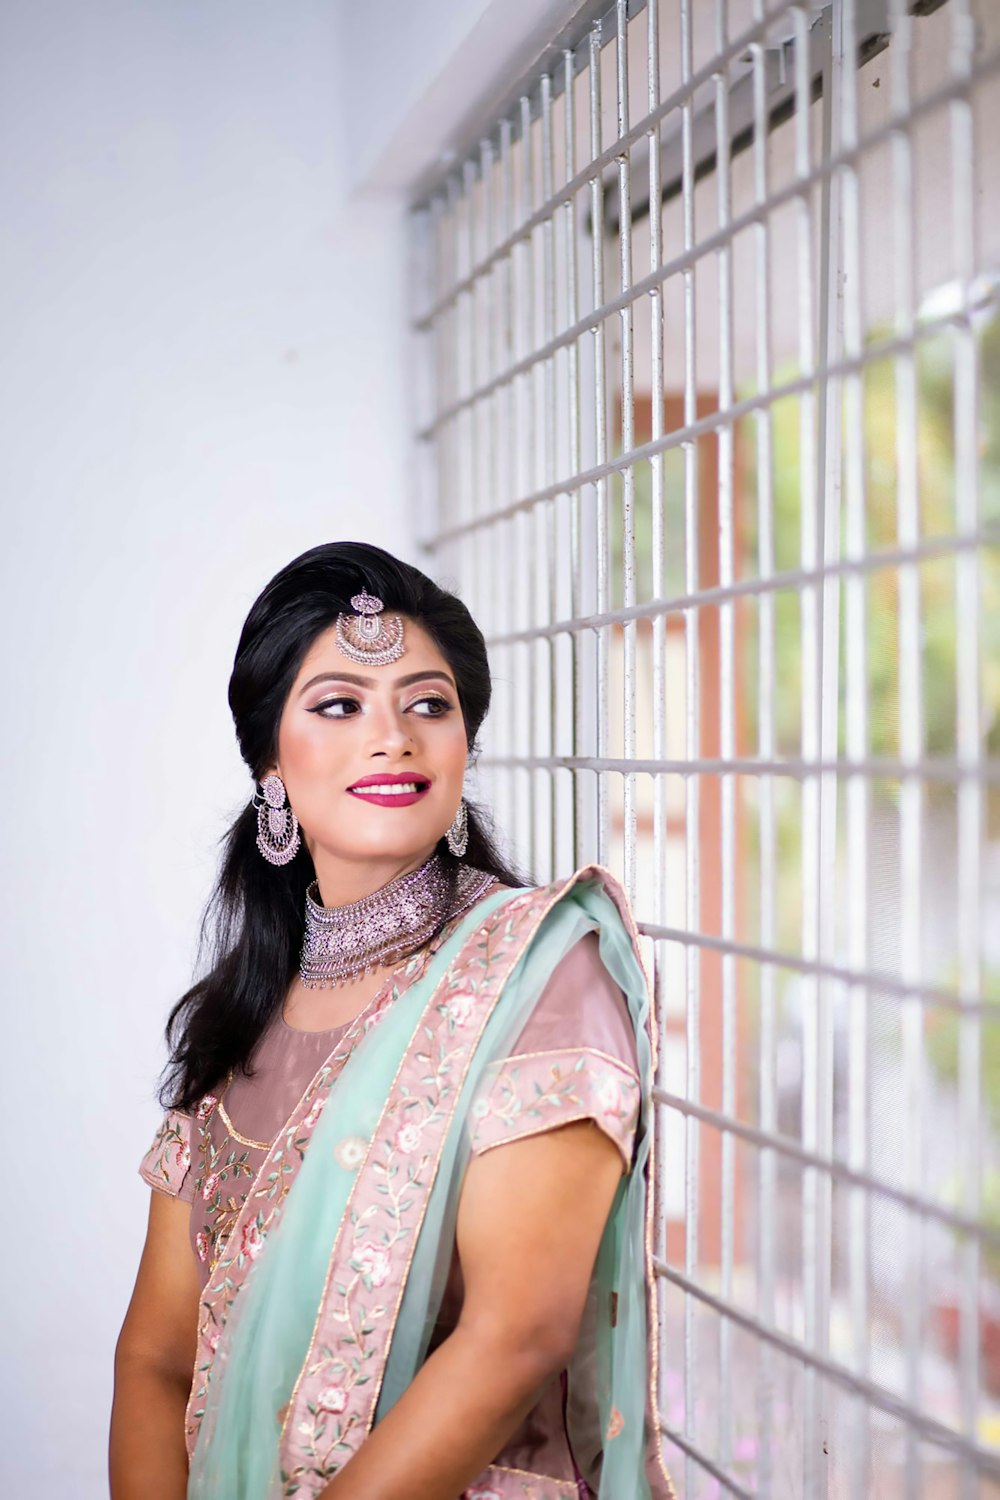 a woman standing next to a window wearing a green sari